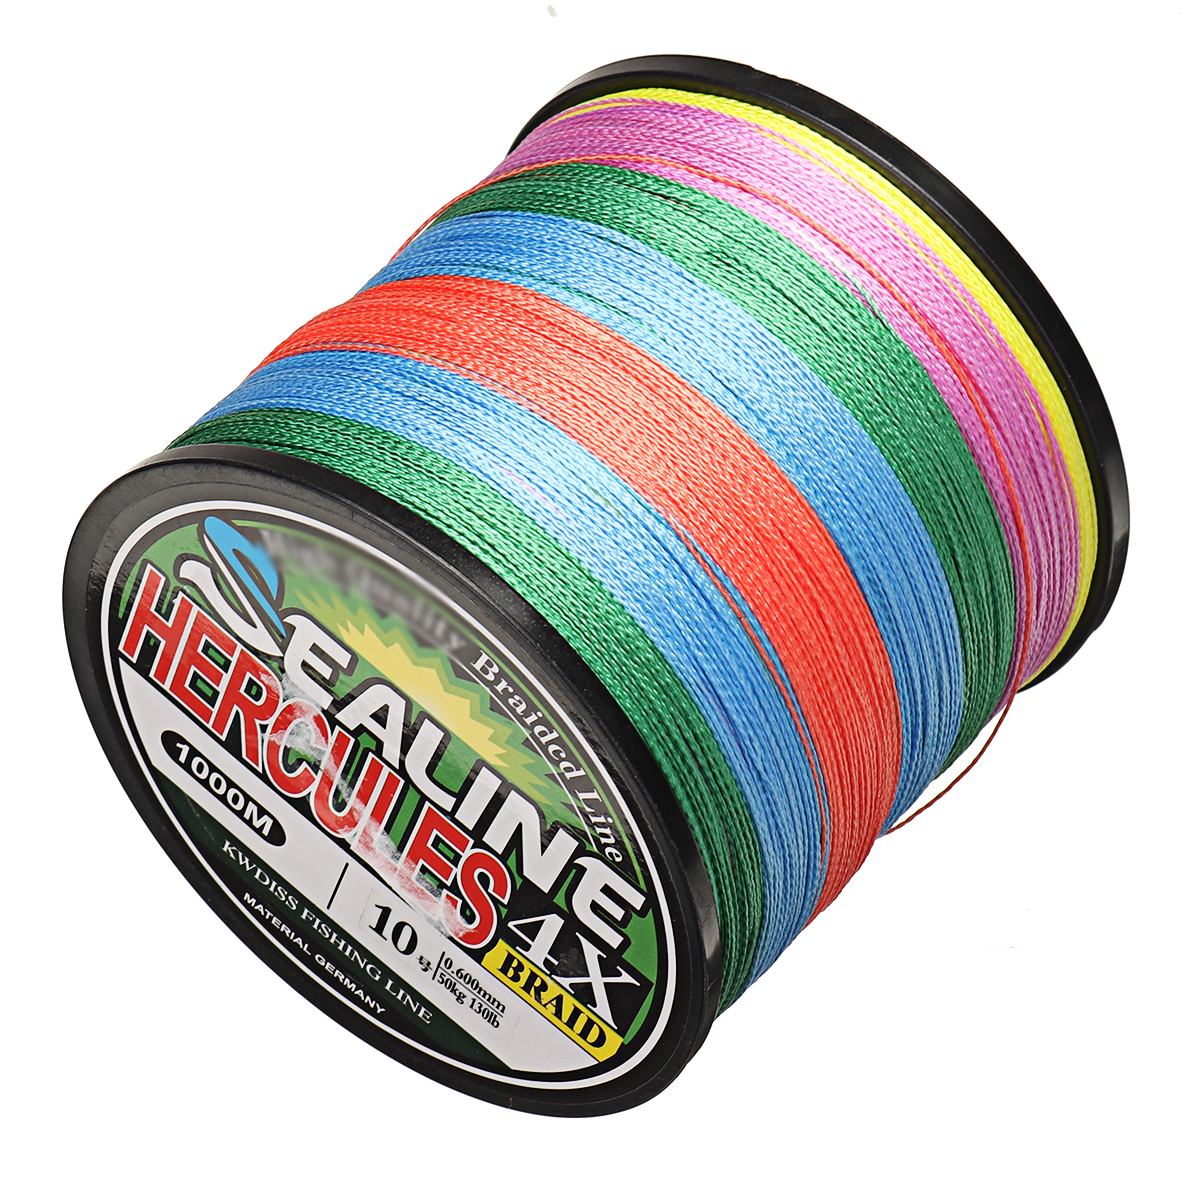 ZANLURE-Super-Strong-Braided-Fishing-Line-1000m-4-Strands-PE-Braid-1015305580130lbs-Fishing-Tackle-1837670-6